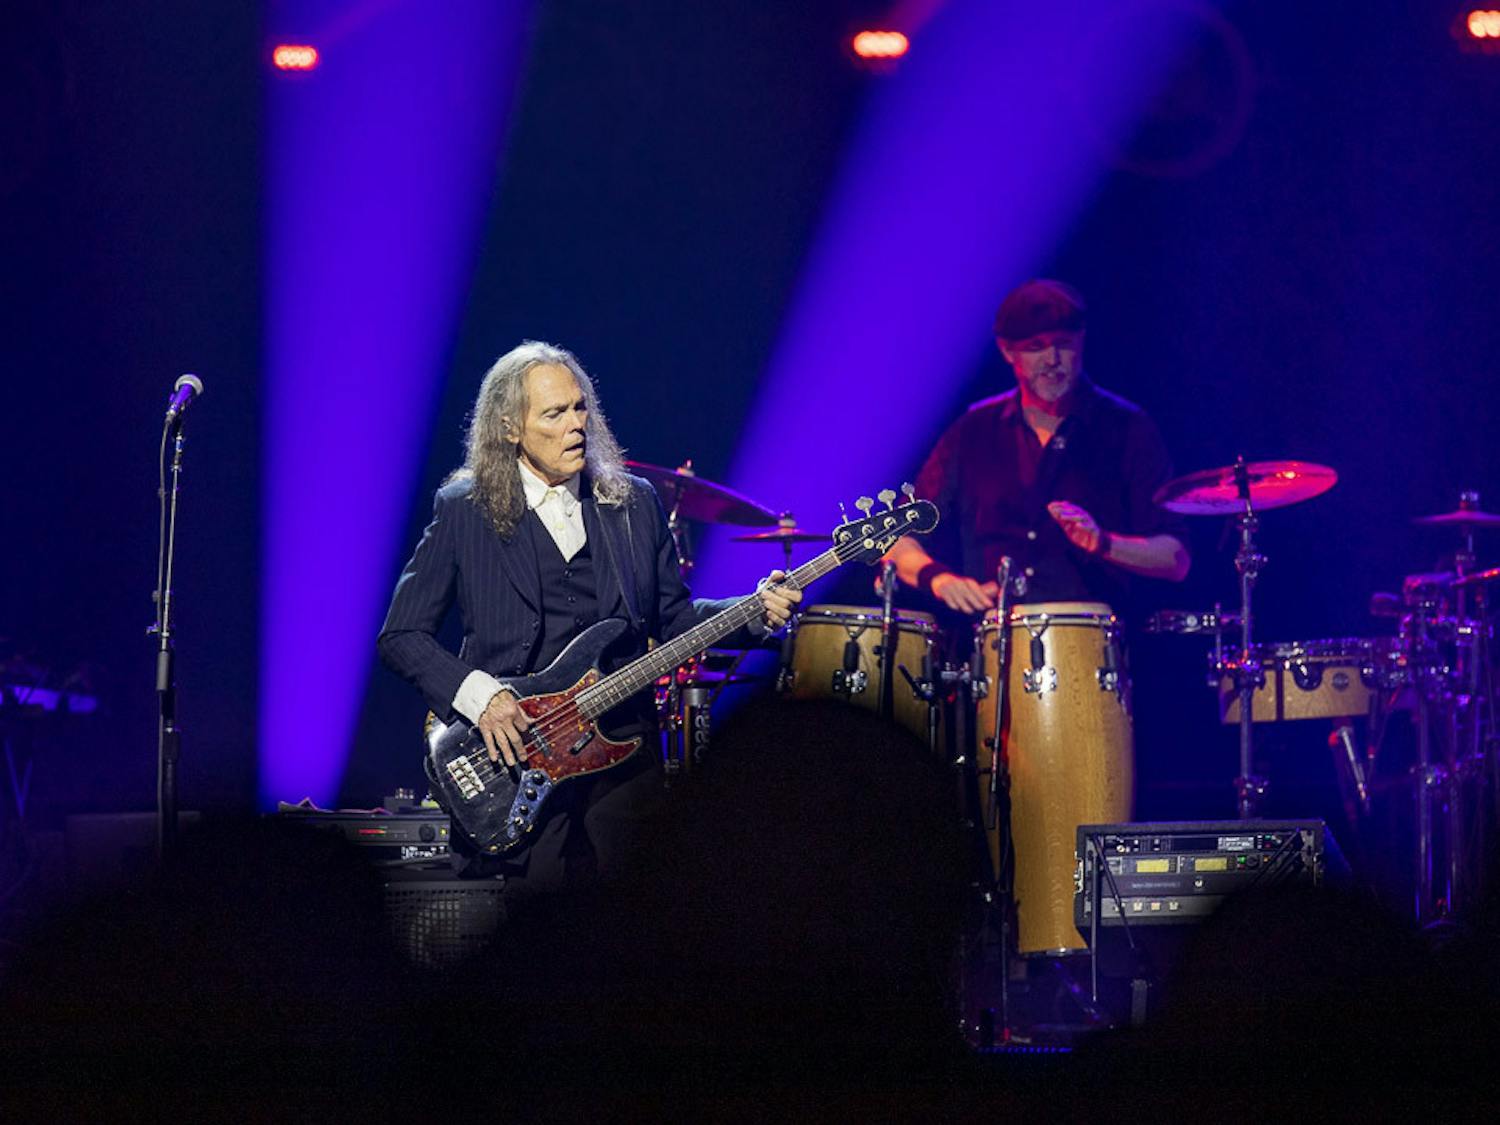 Eagles bassist Timothy B. Schmit performs at Colonial Life Arena on March 30, 2023. The band opened up the night by performing songs from its "Hotel California" album.